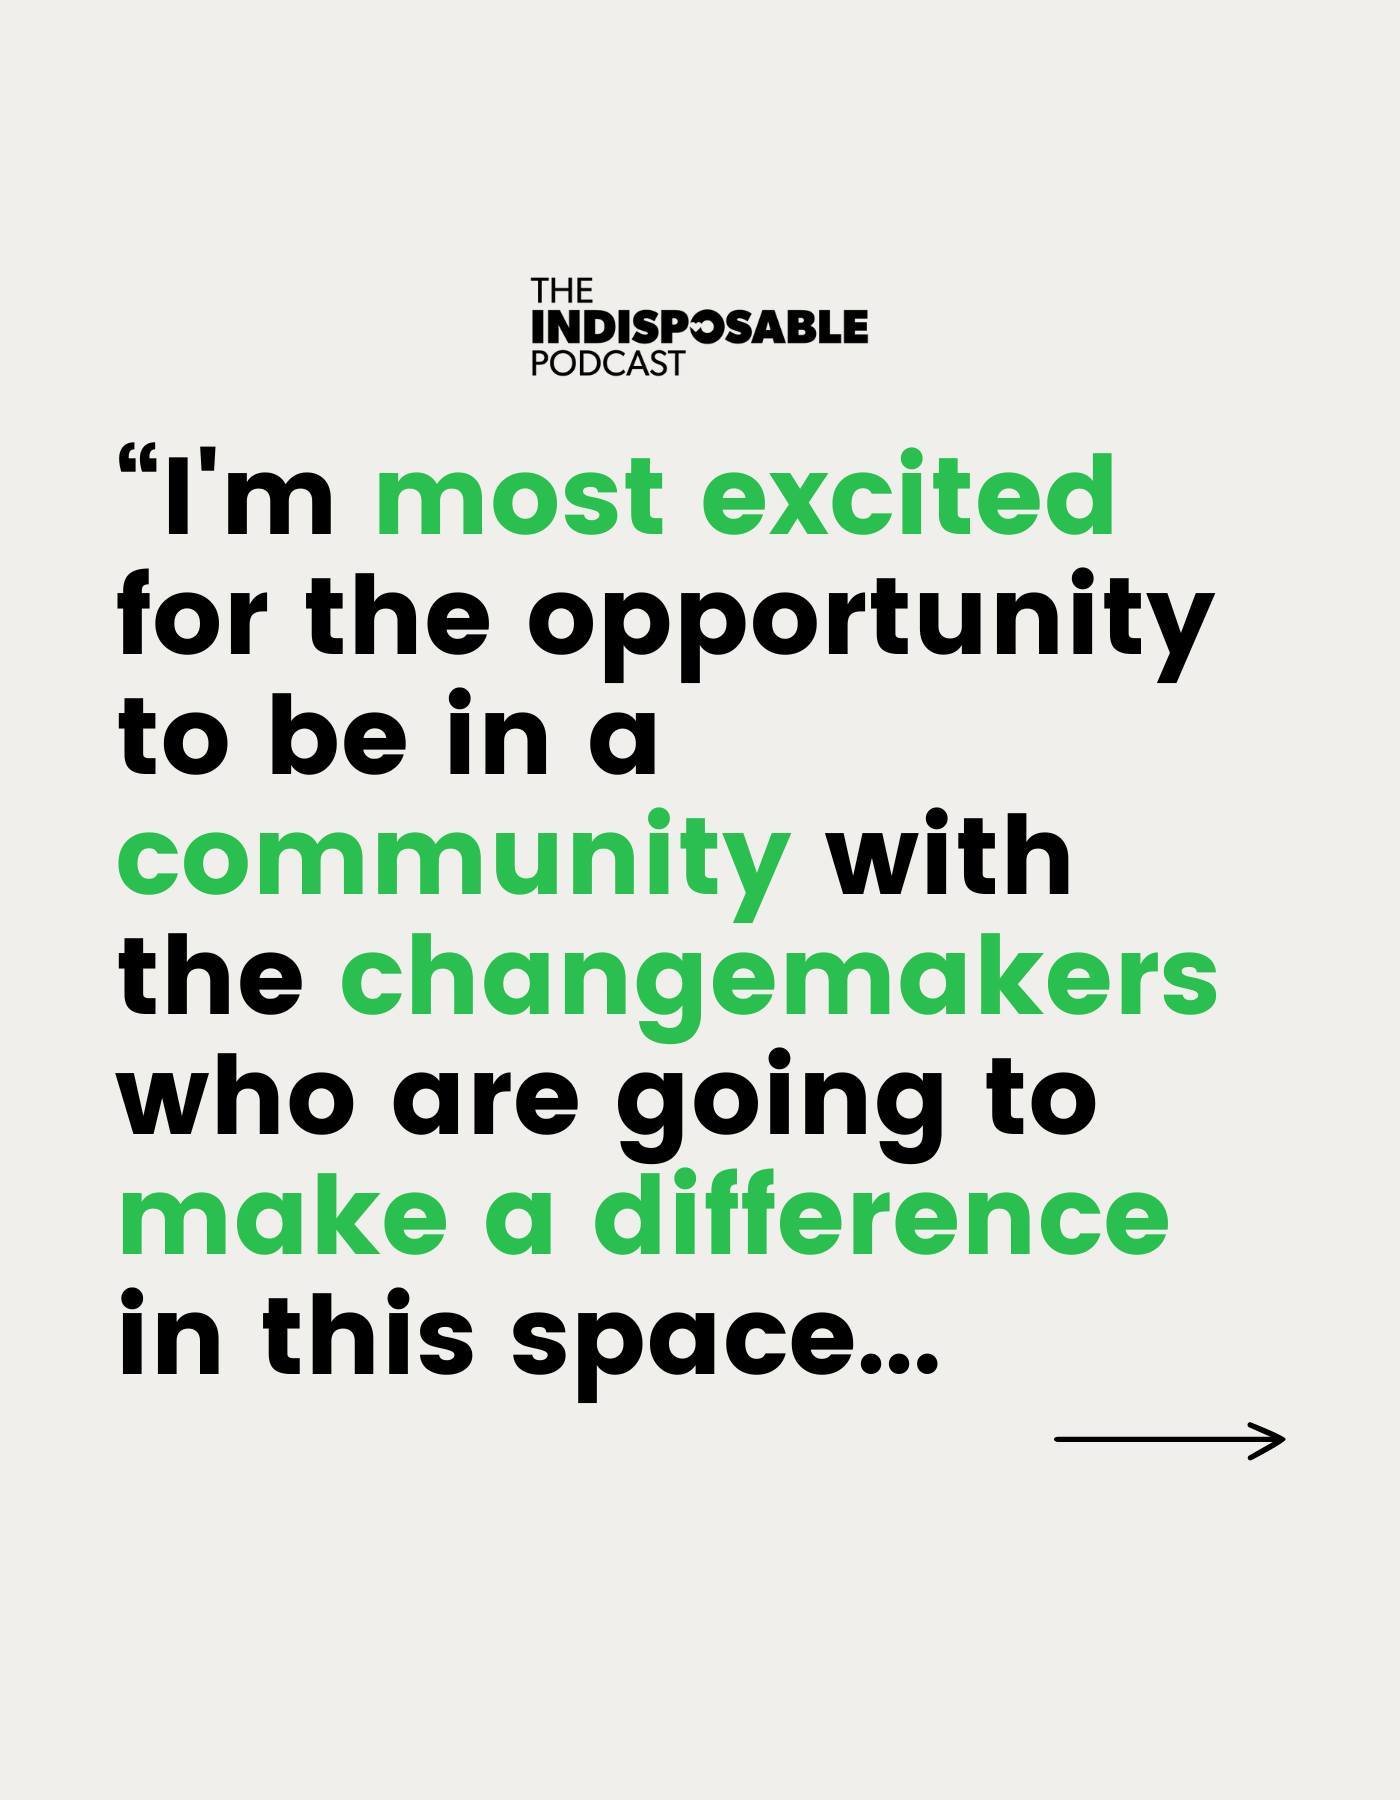 We asked Bryan Lewis, Program Manager at GreenBiz @greenbiz_group, what he was most excited about at The Reusies and Circularity next week, and this was his response 🙌💫

On a new episode of #TheIndisposablePodcast, Bryan Lewis sits down with guest 